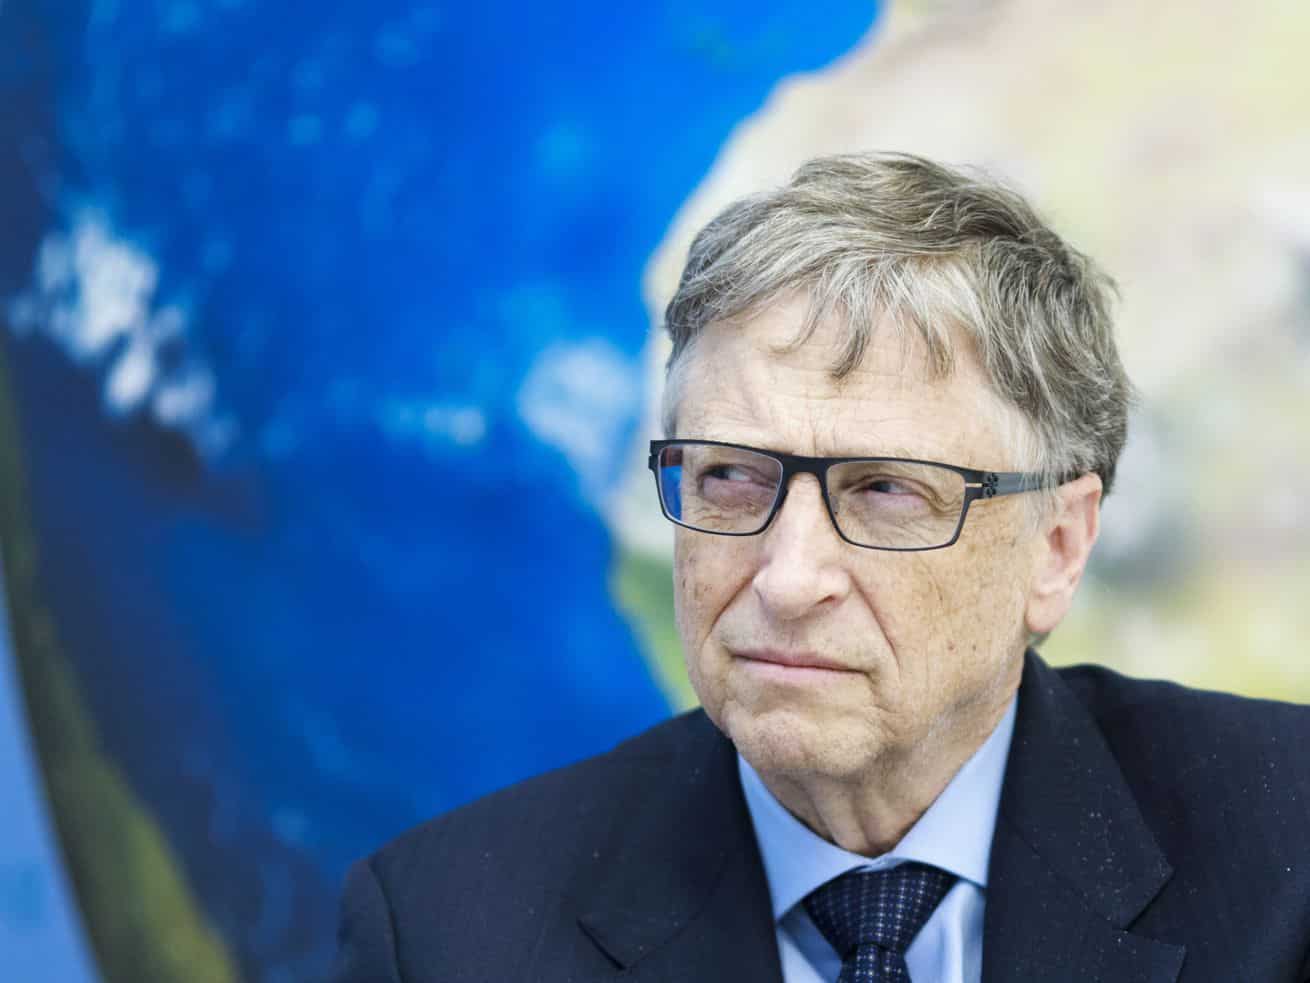 The controversy over Bill Gates becoming the largest private farmland owner in the US